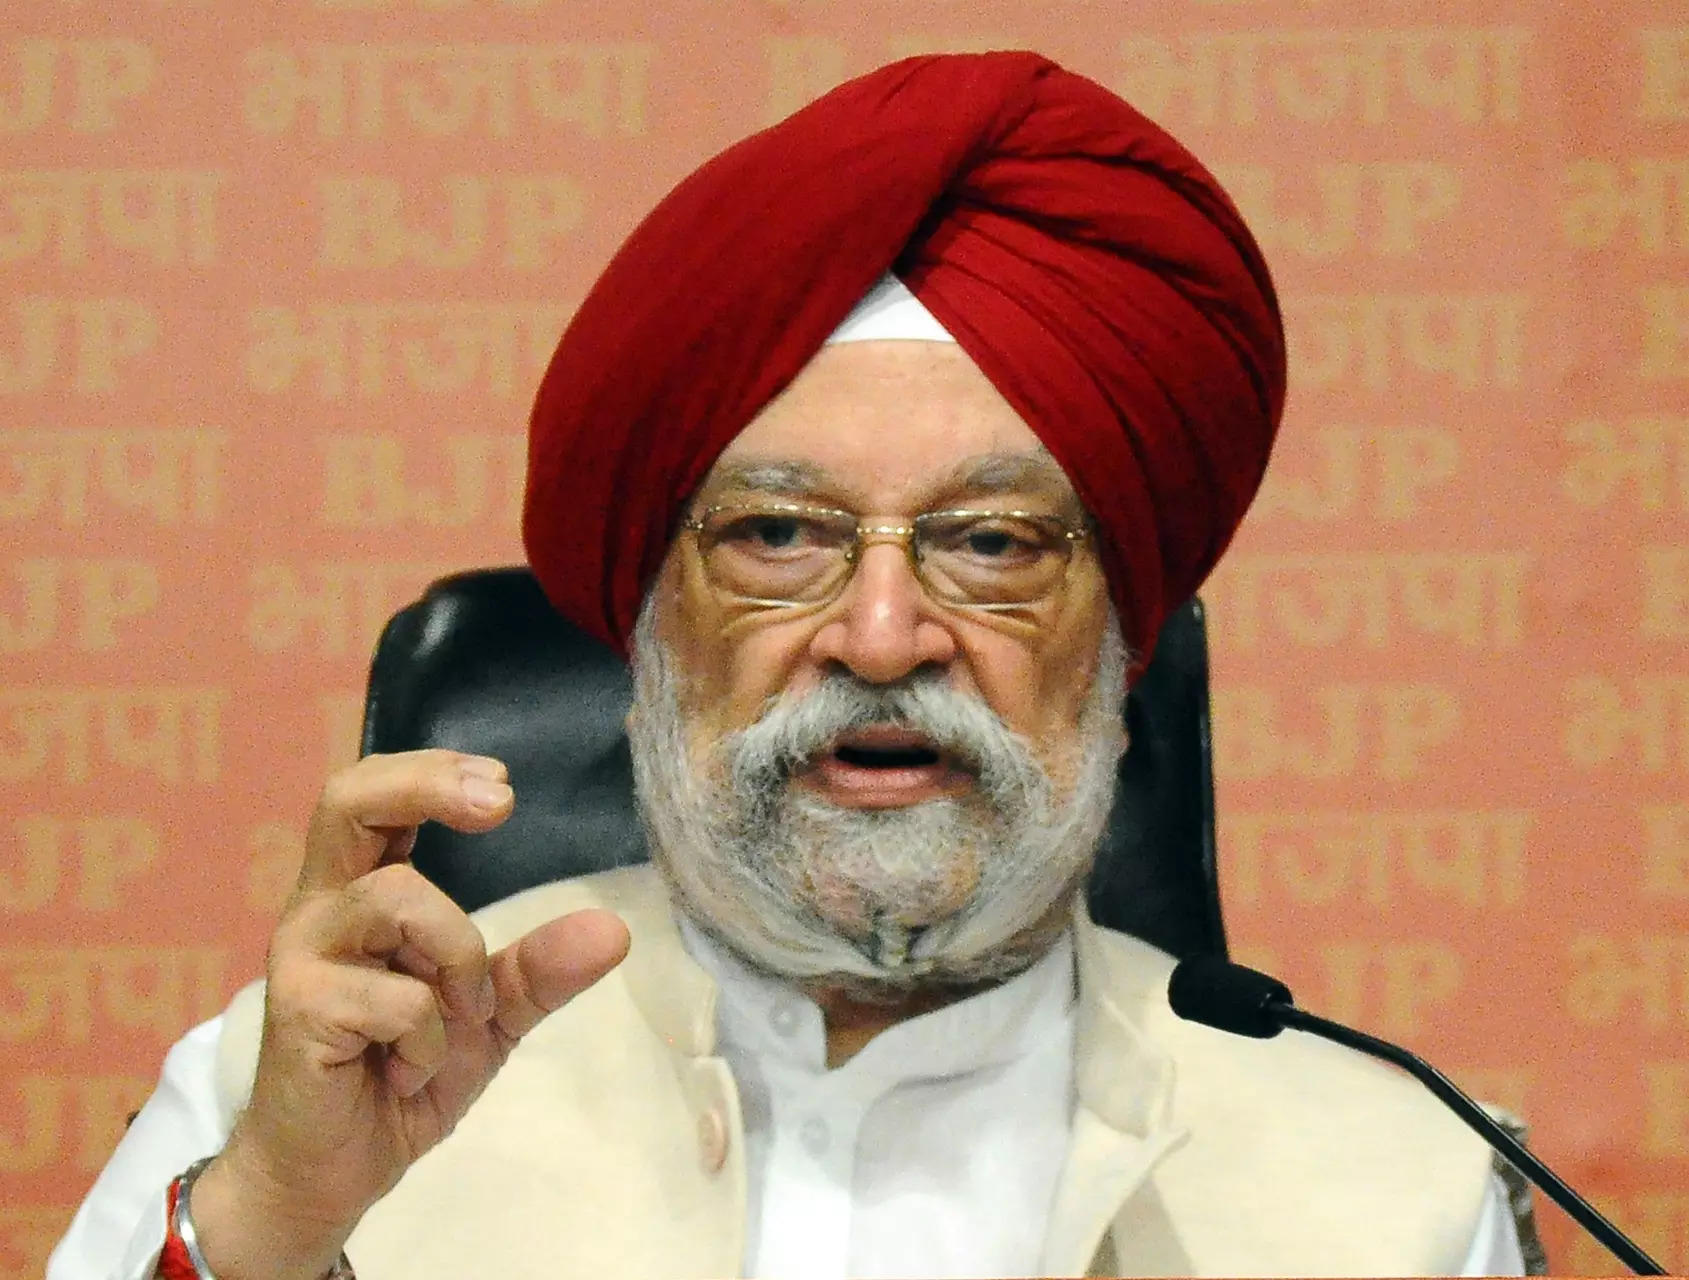 Petrol prices highest in Rajasthan because of taxes imposed by Congress government: Hardeep Puri 